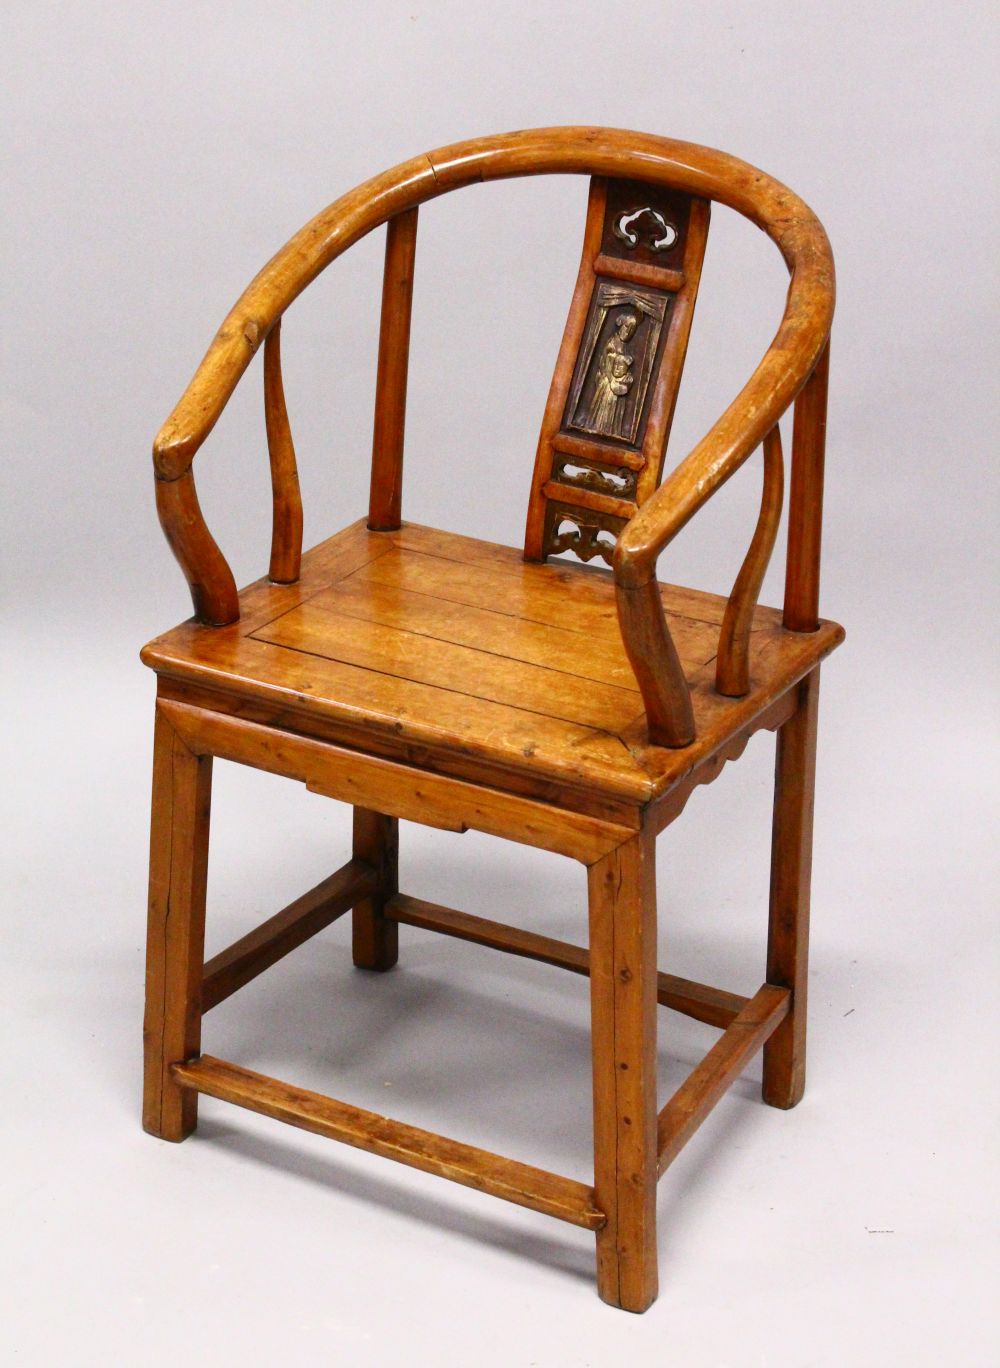 A CHINESE CARVED WOOD HOOP BACK ARM CHAIR, the back panel carved with a figure and openwork with